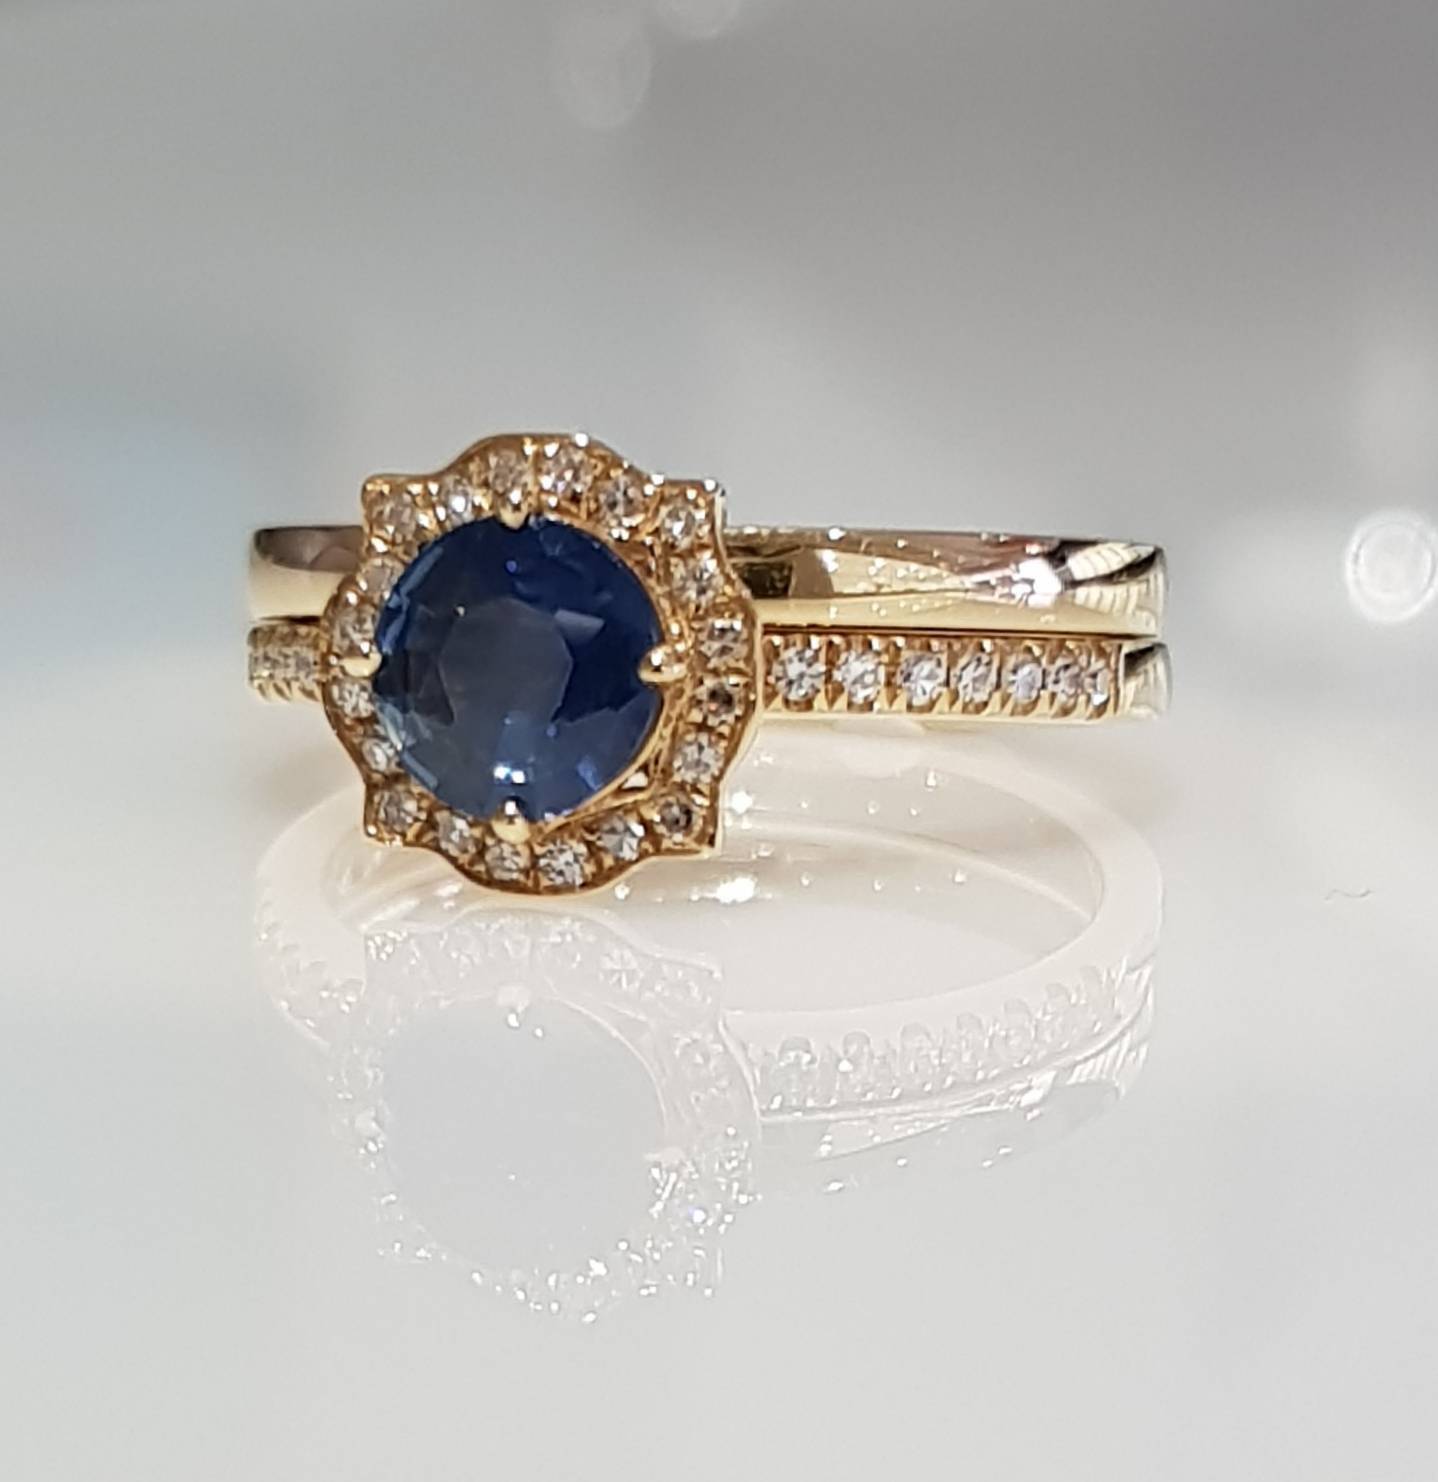 Buy 18K Yellow Gold Vintage Style Sapphire And Diamond Ring